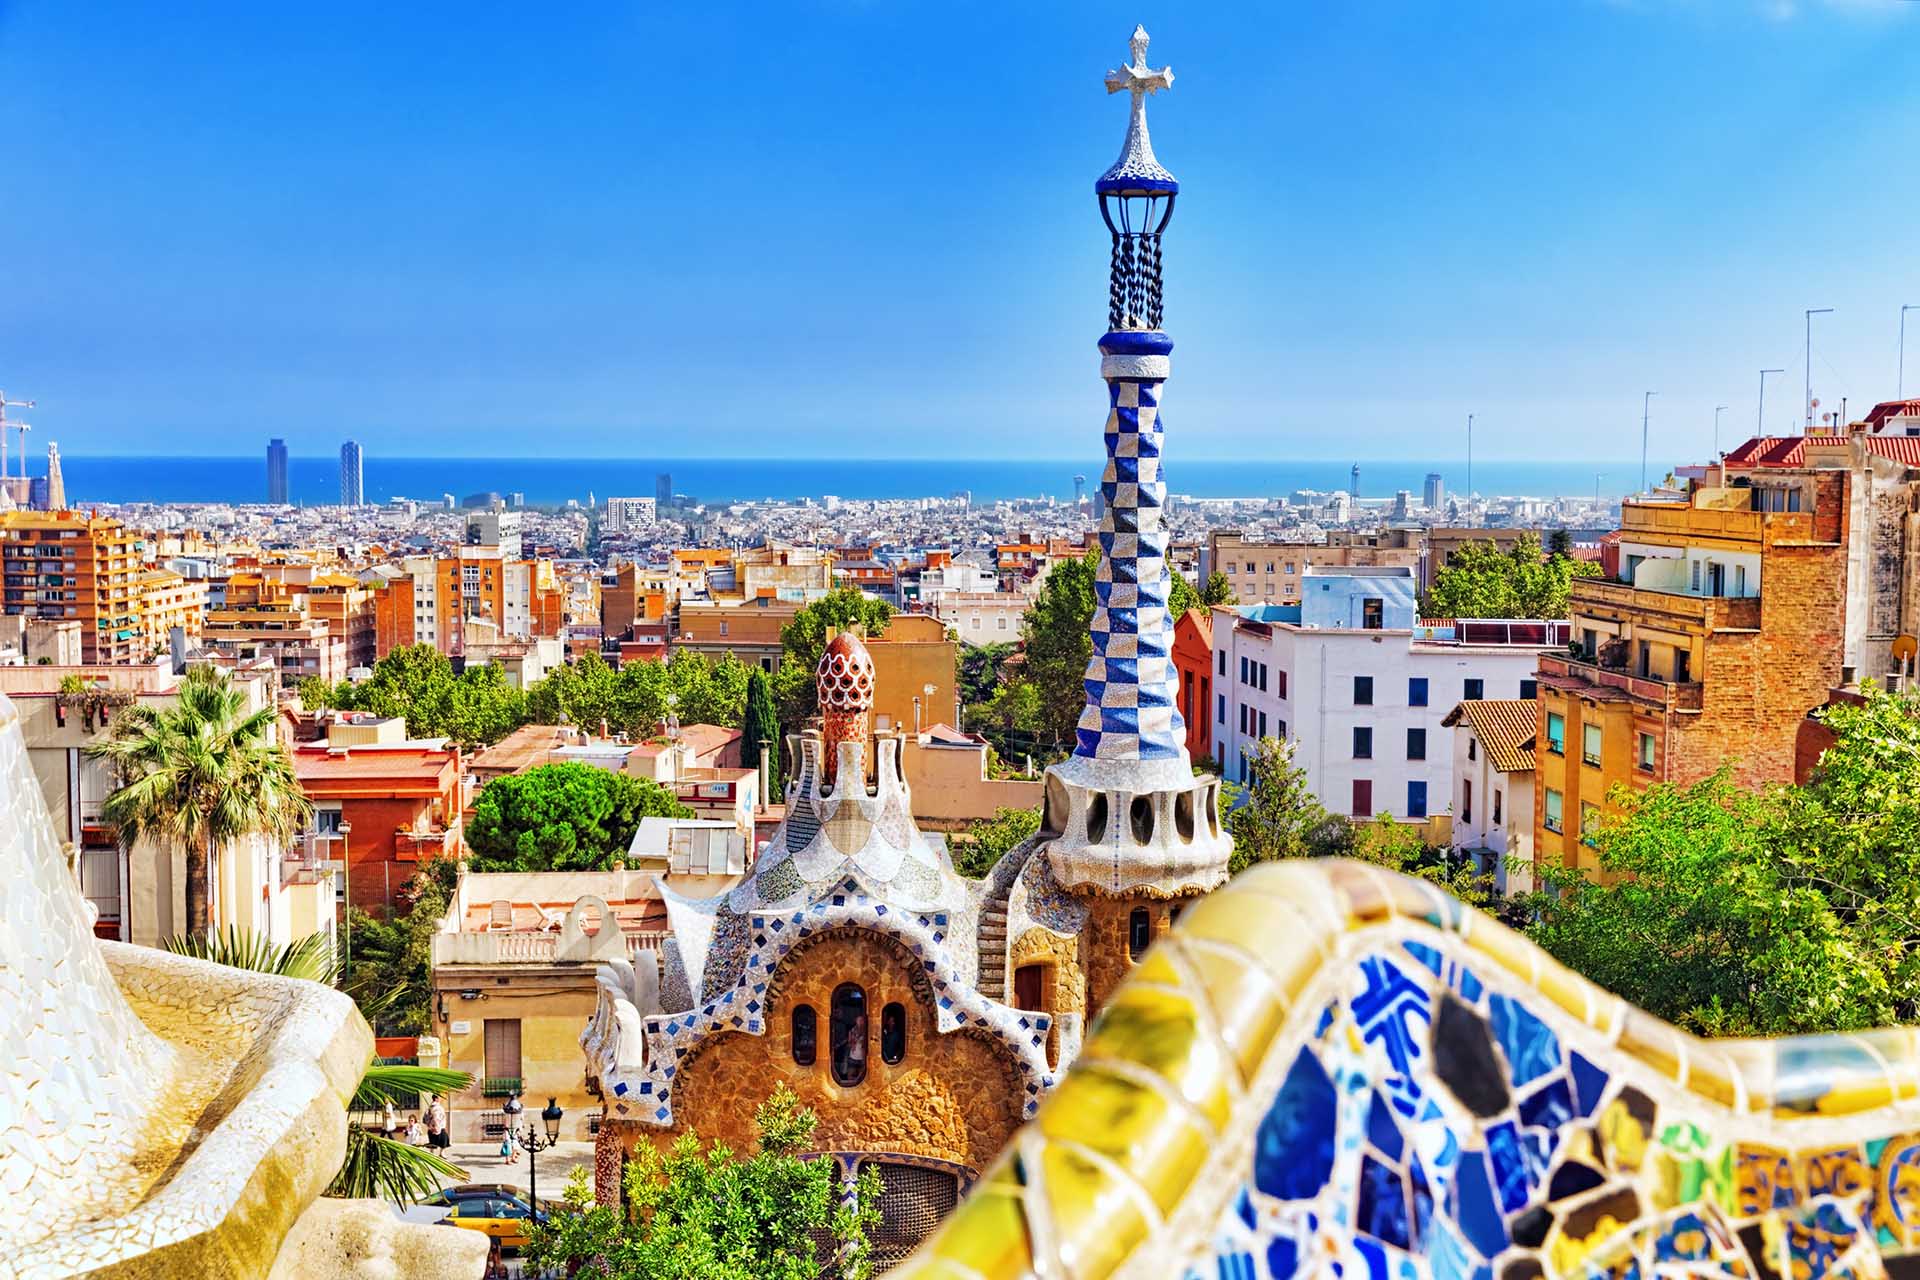 Upgrade Spain – Your DMC agency based in Barcelona with great knowledge